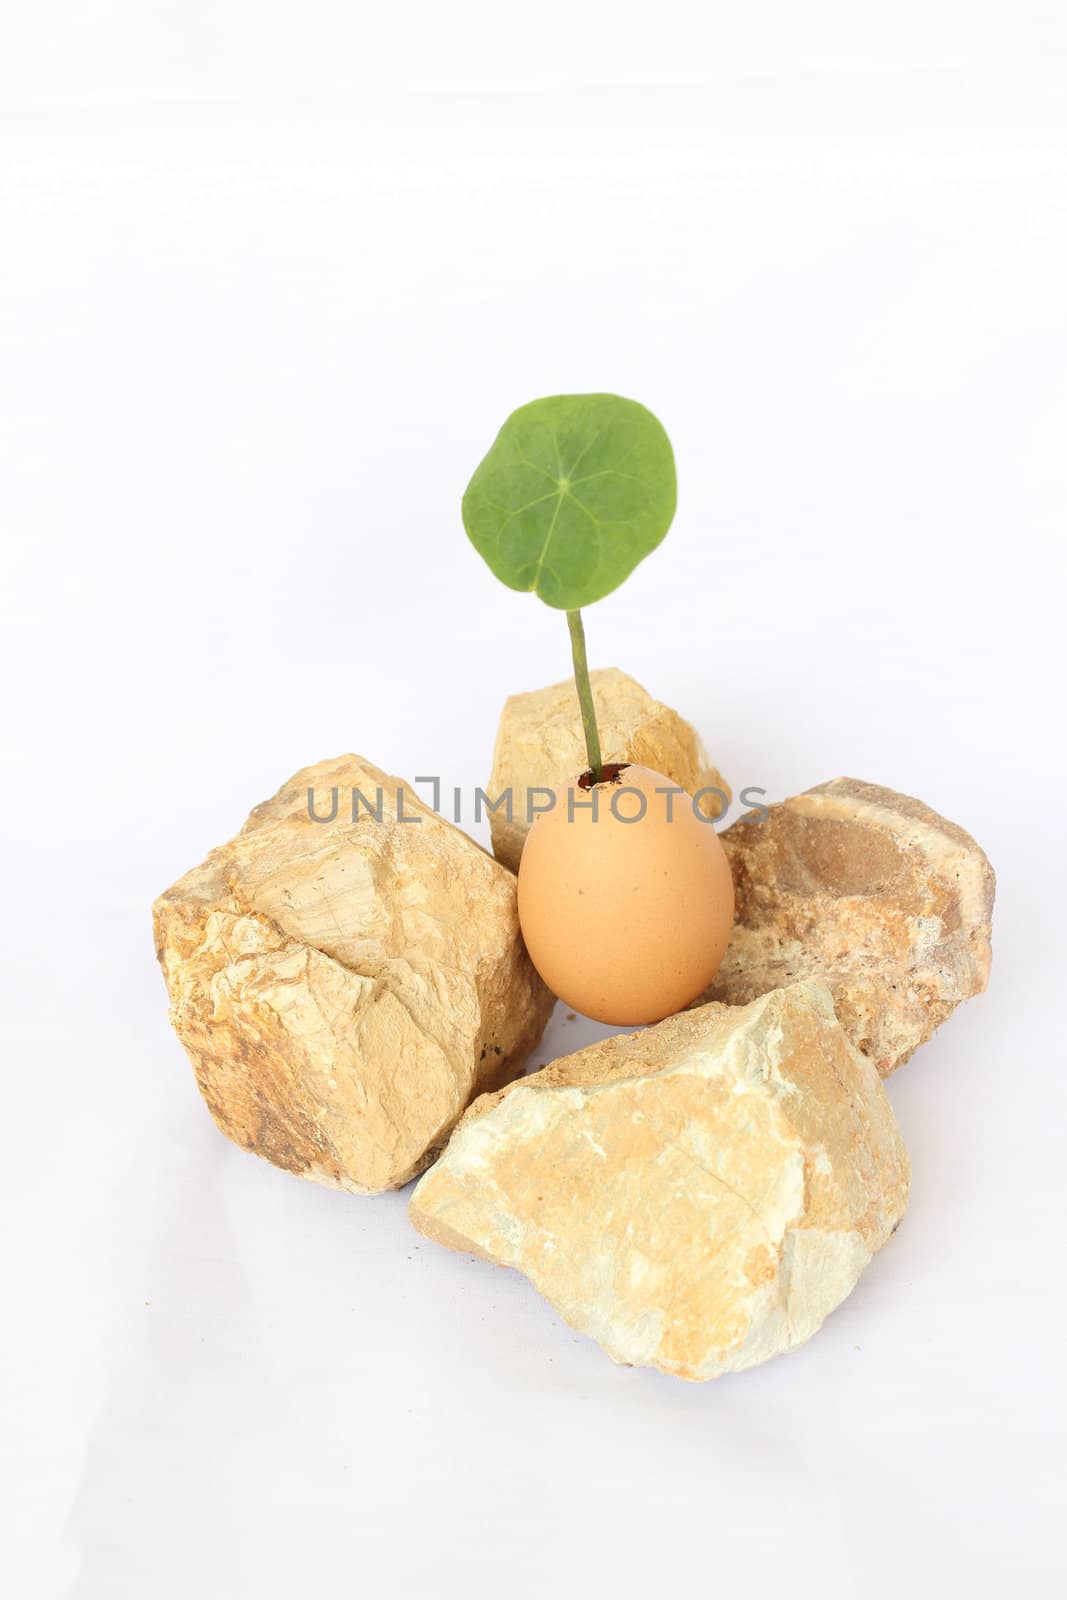 Plant in egg surround with rocks on white background